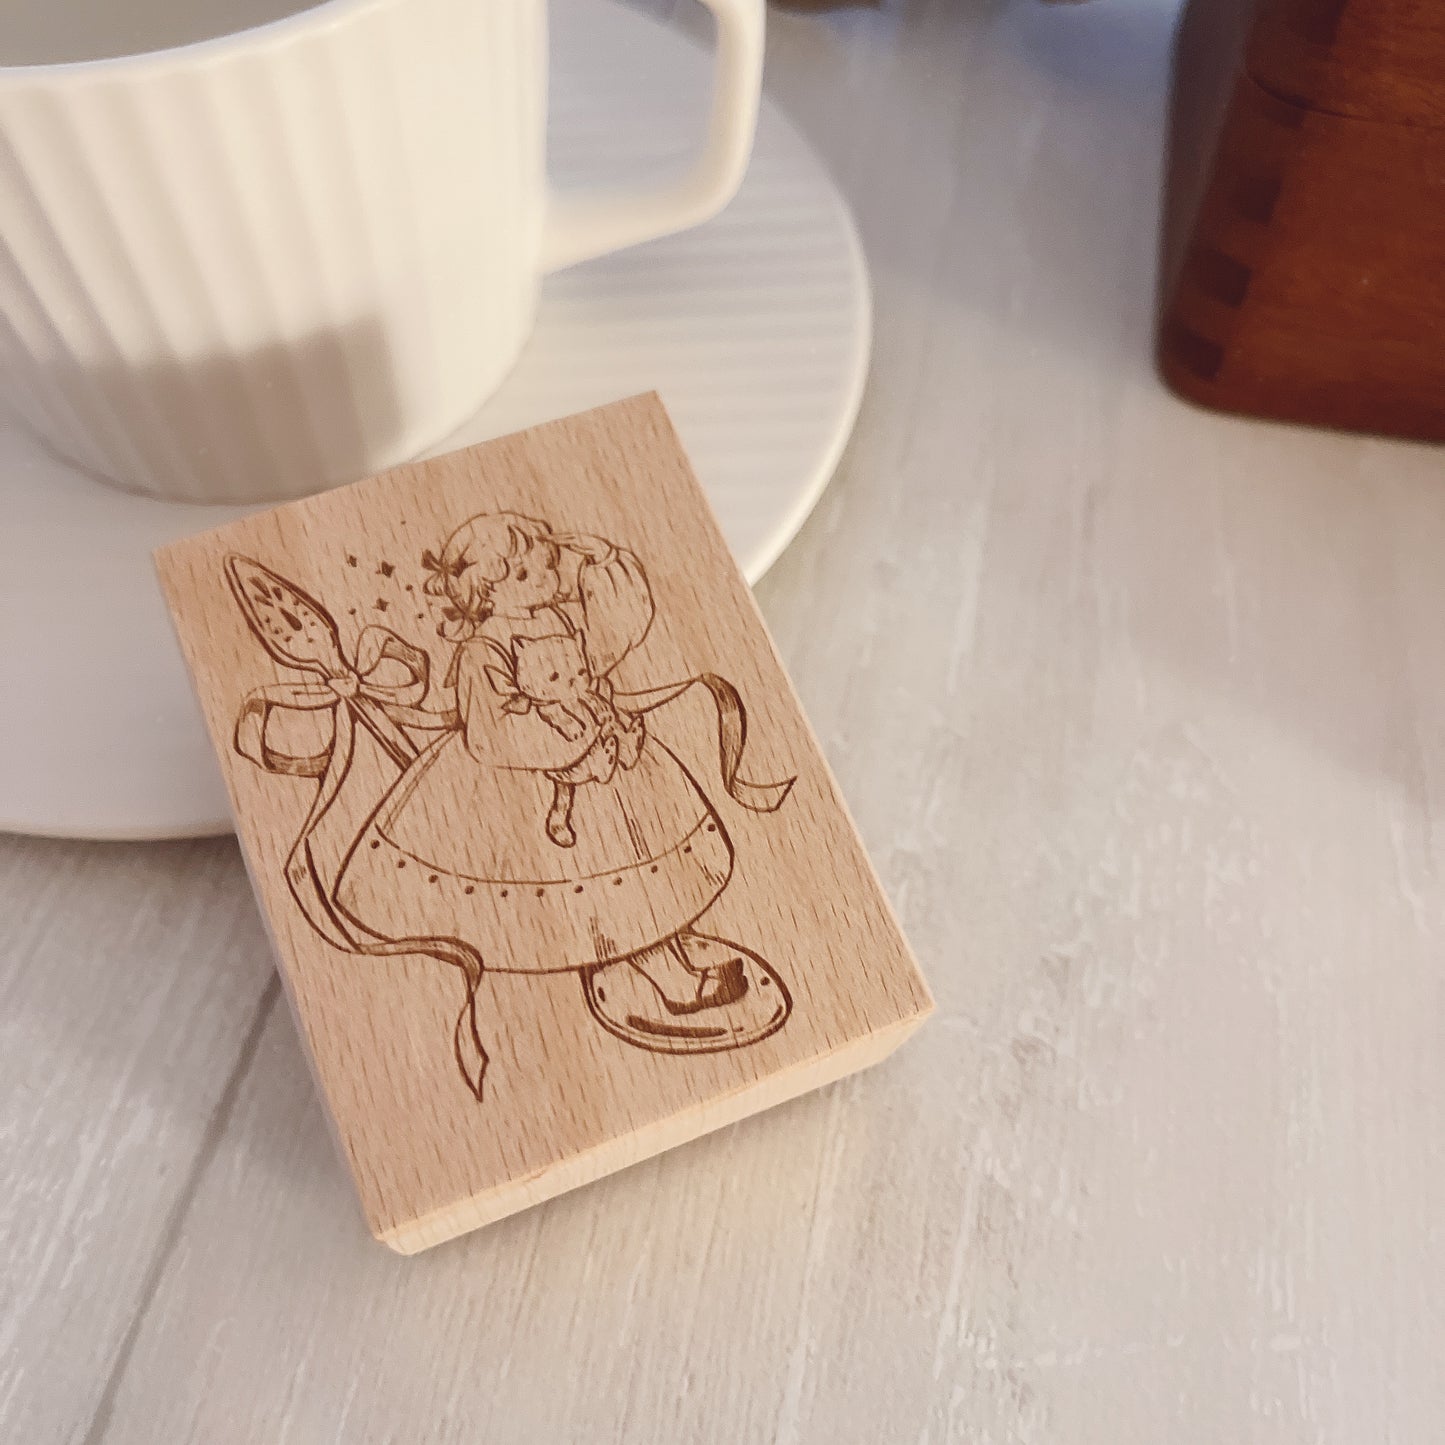 Two Raccoons Coffee & Tea Girl Rubber Stamps